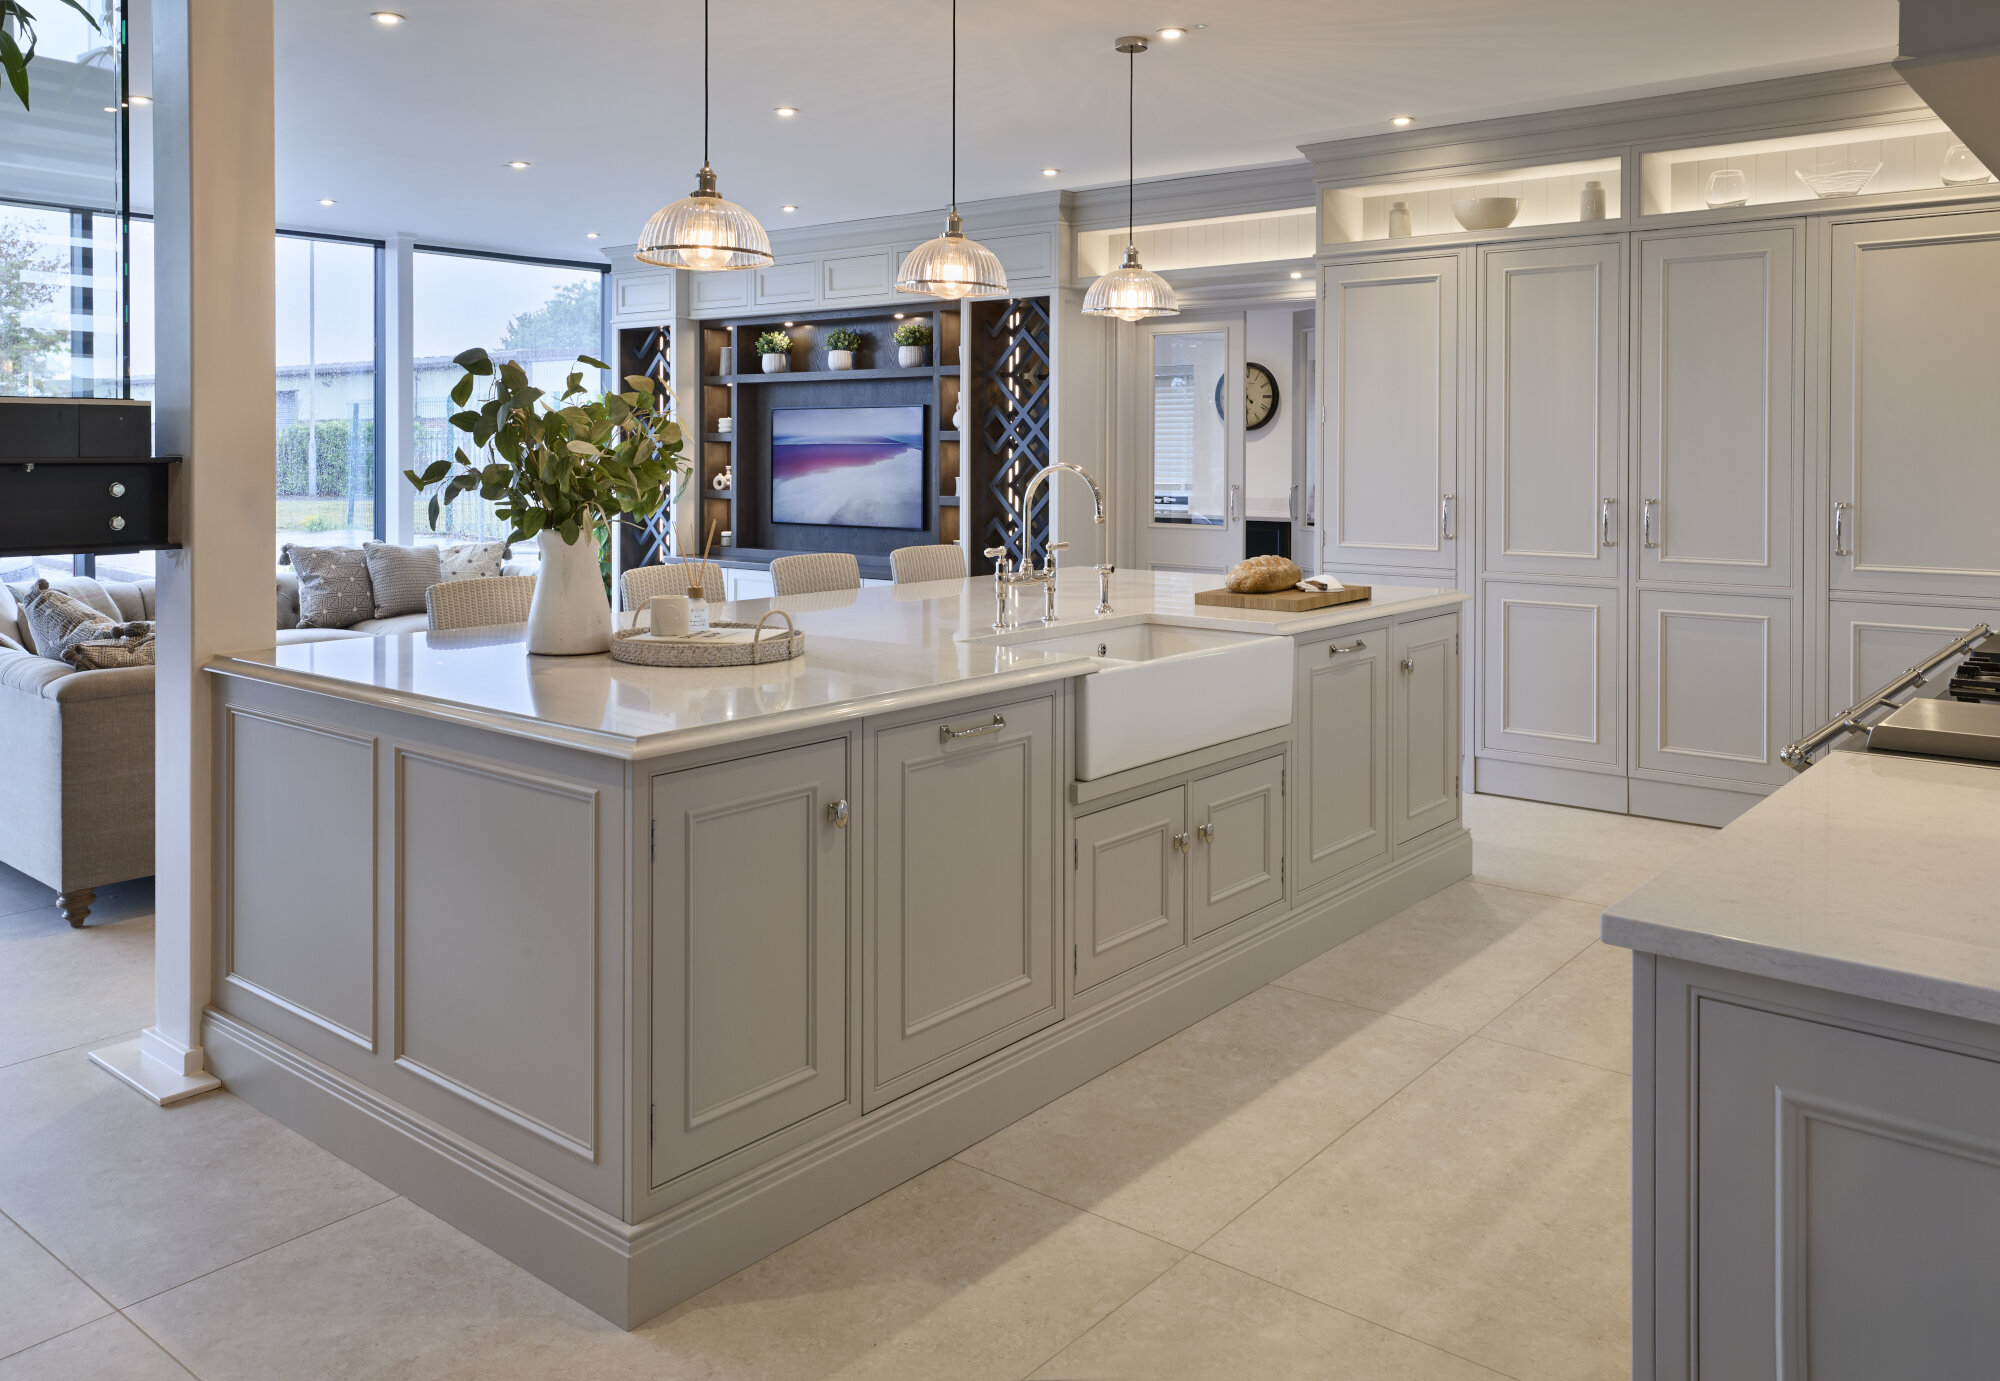 This Bespoke Kitchen Design is on display in our showroom near Hucknall